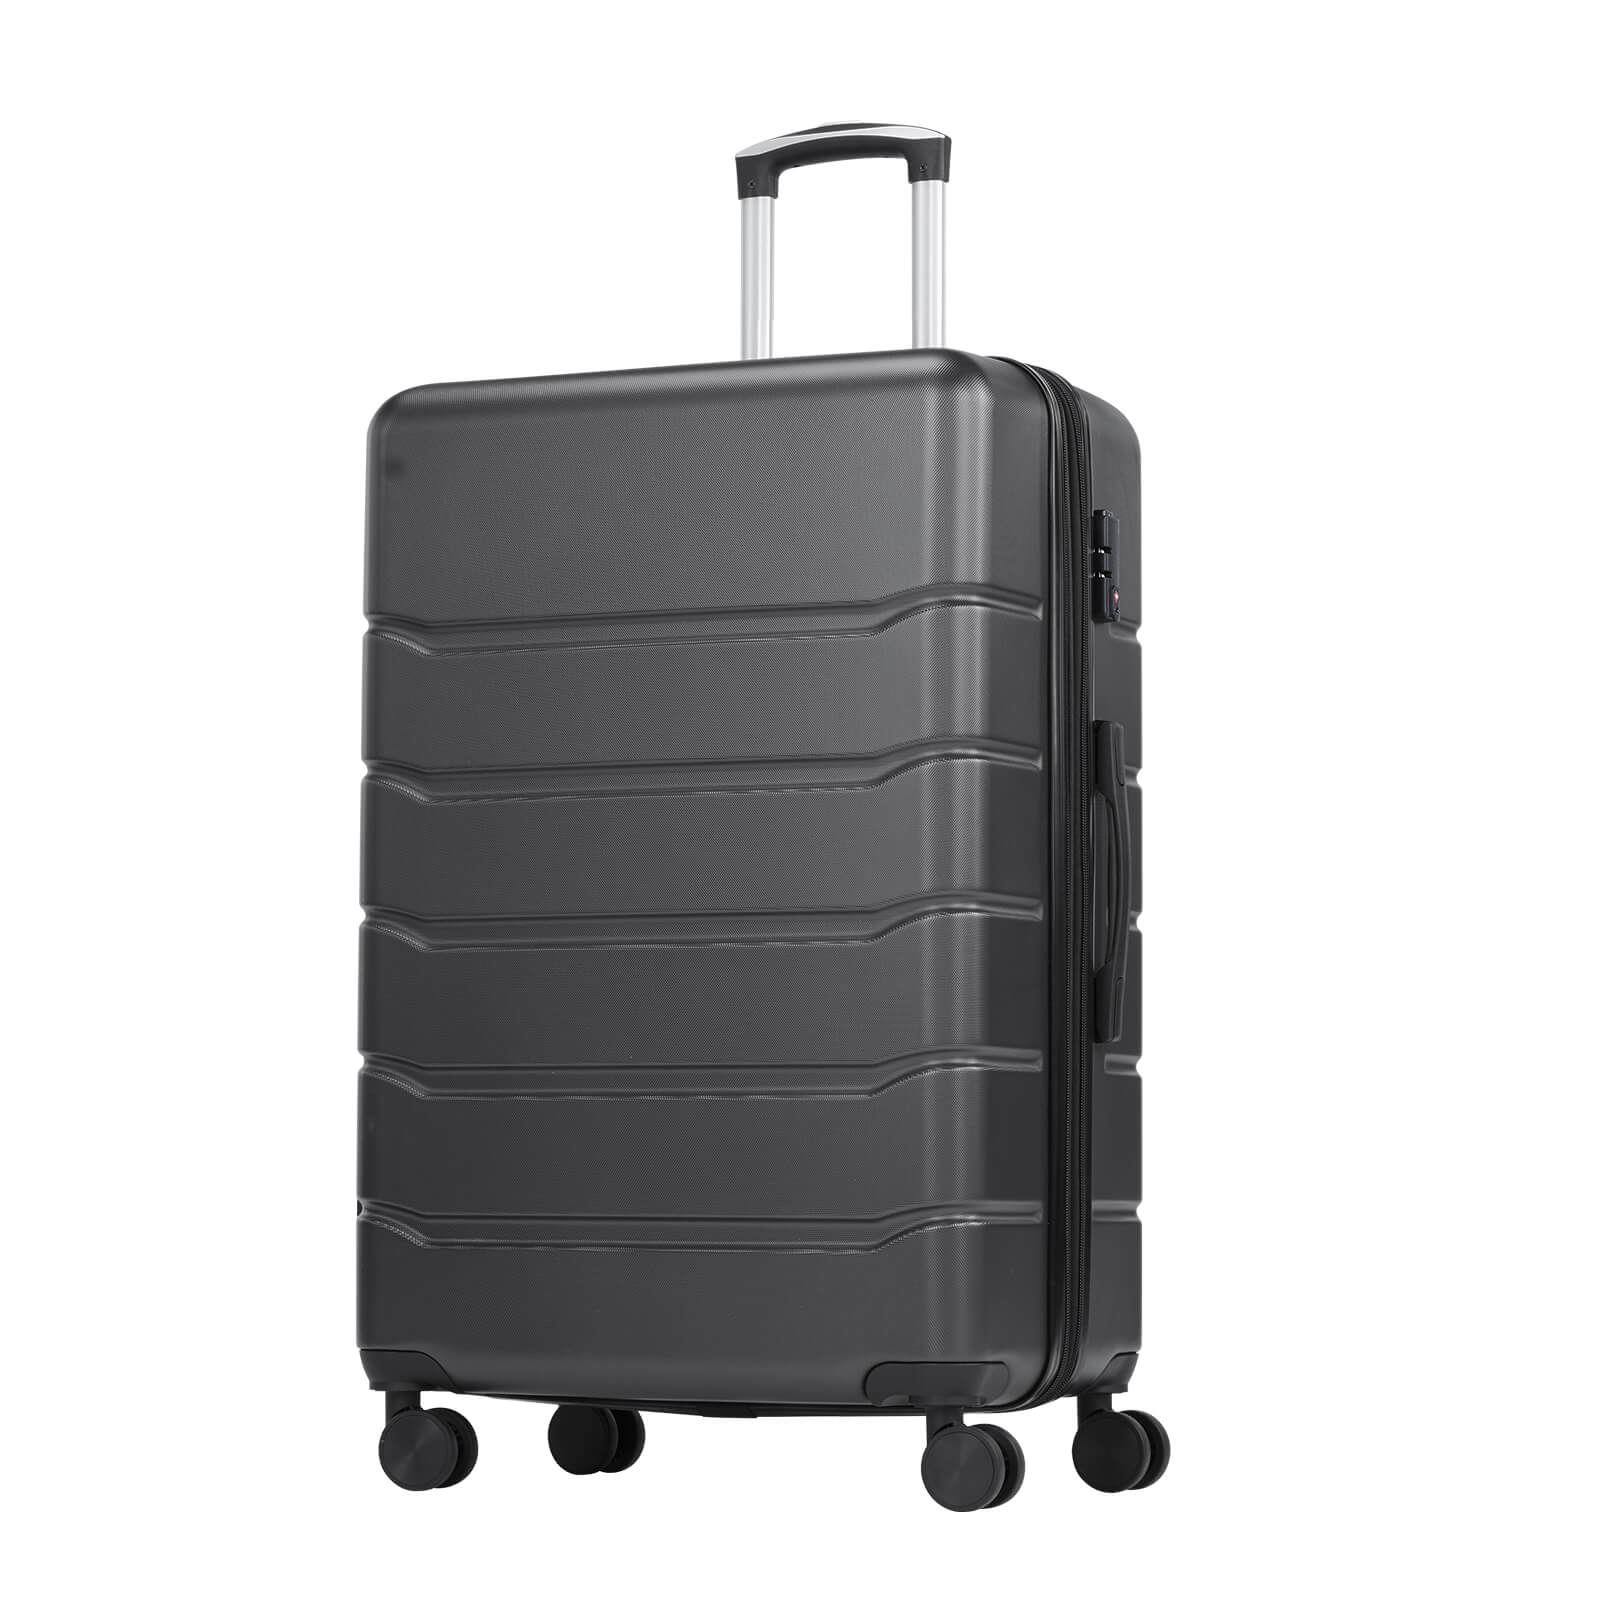 Lightweight Trolley Case - 20/24/28 inches, with TSA lock, portable, for travelling, business trips